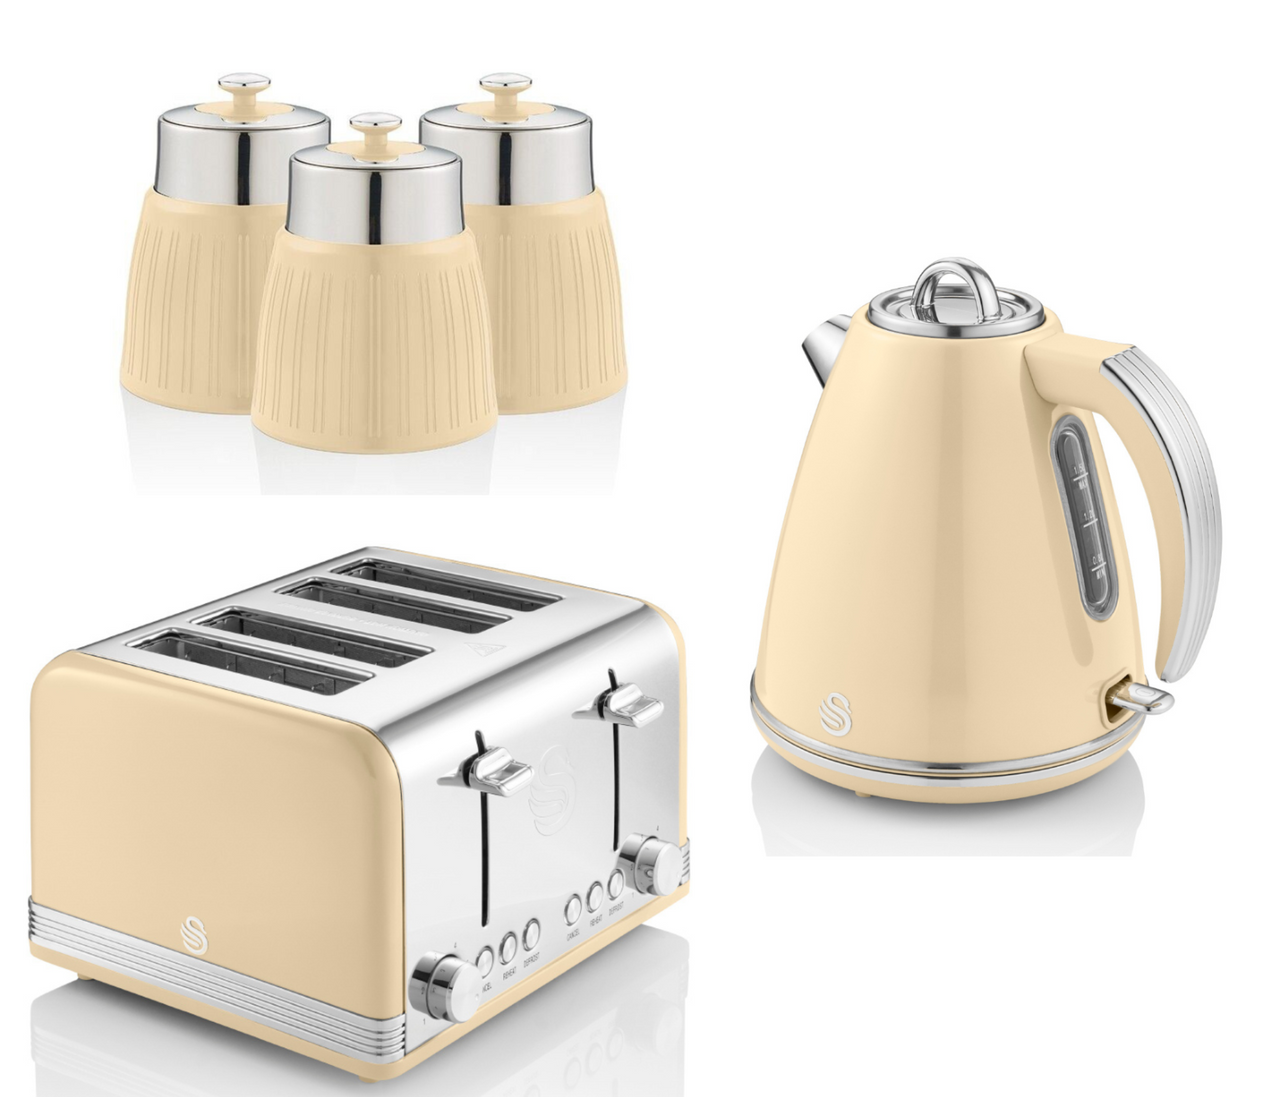 Swan Retro Cream 1.5L 3KW Jug Kettle, 4 Slice Toaster & Tea, Coffee, Sugar Canisters. Vintage Matching Kitchen Set of 5 in Cream